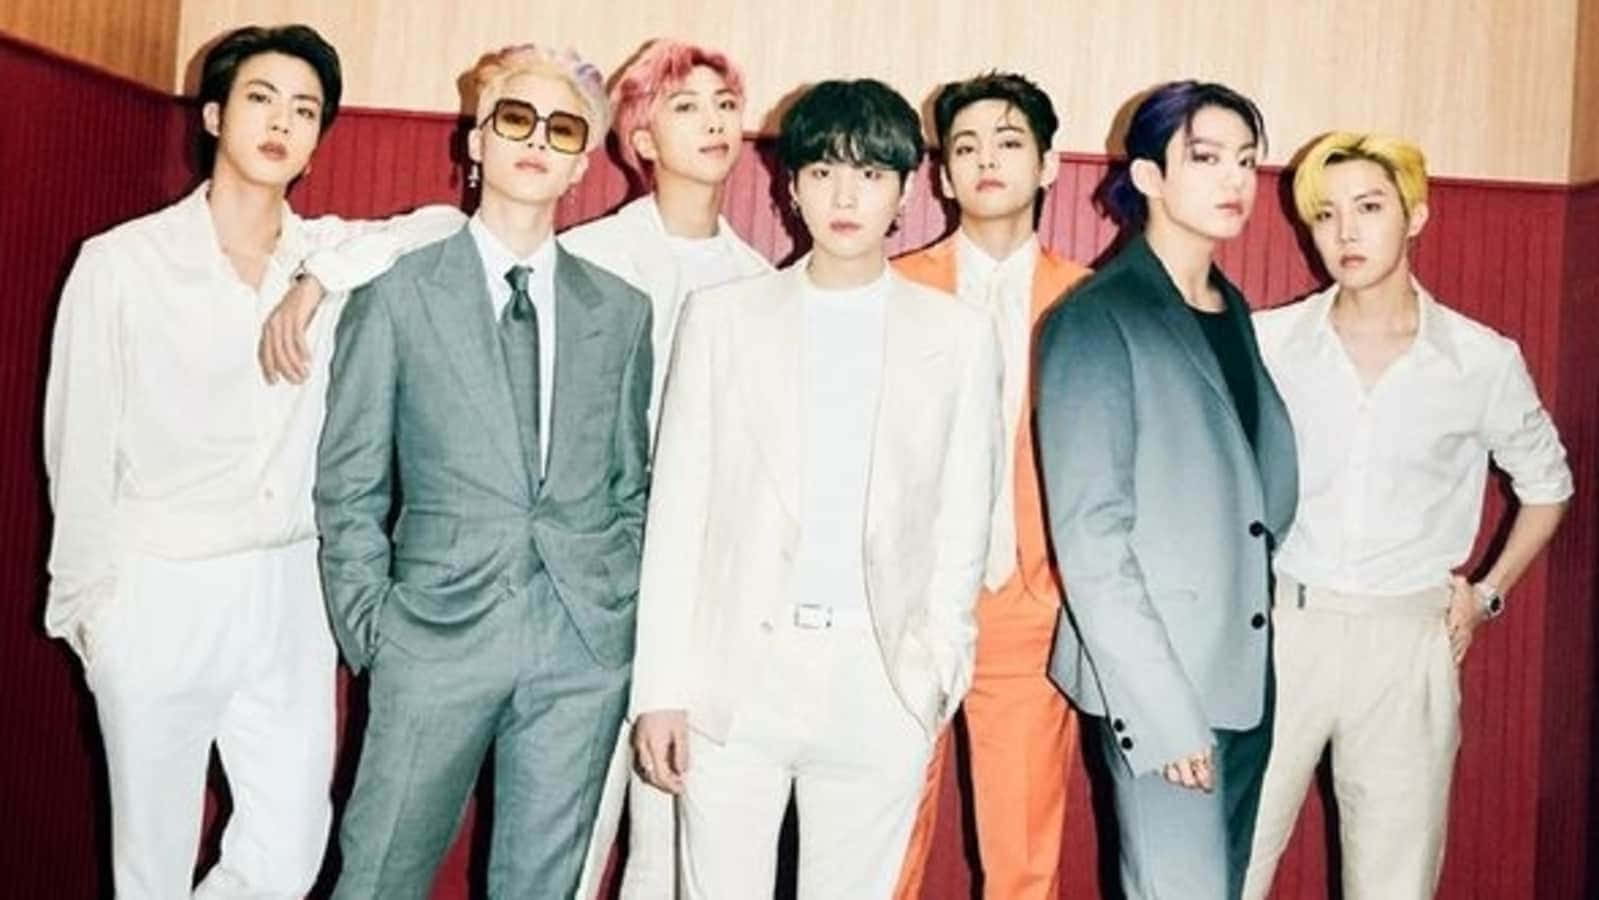 BTS catches you by surprise with the release of their new single "Butter"!